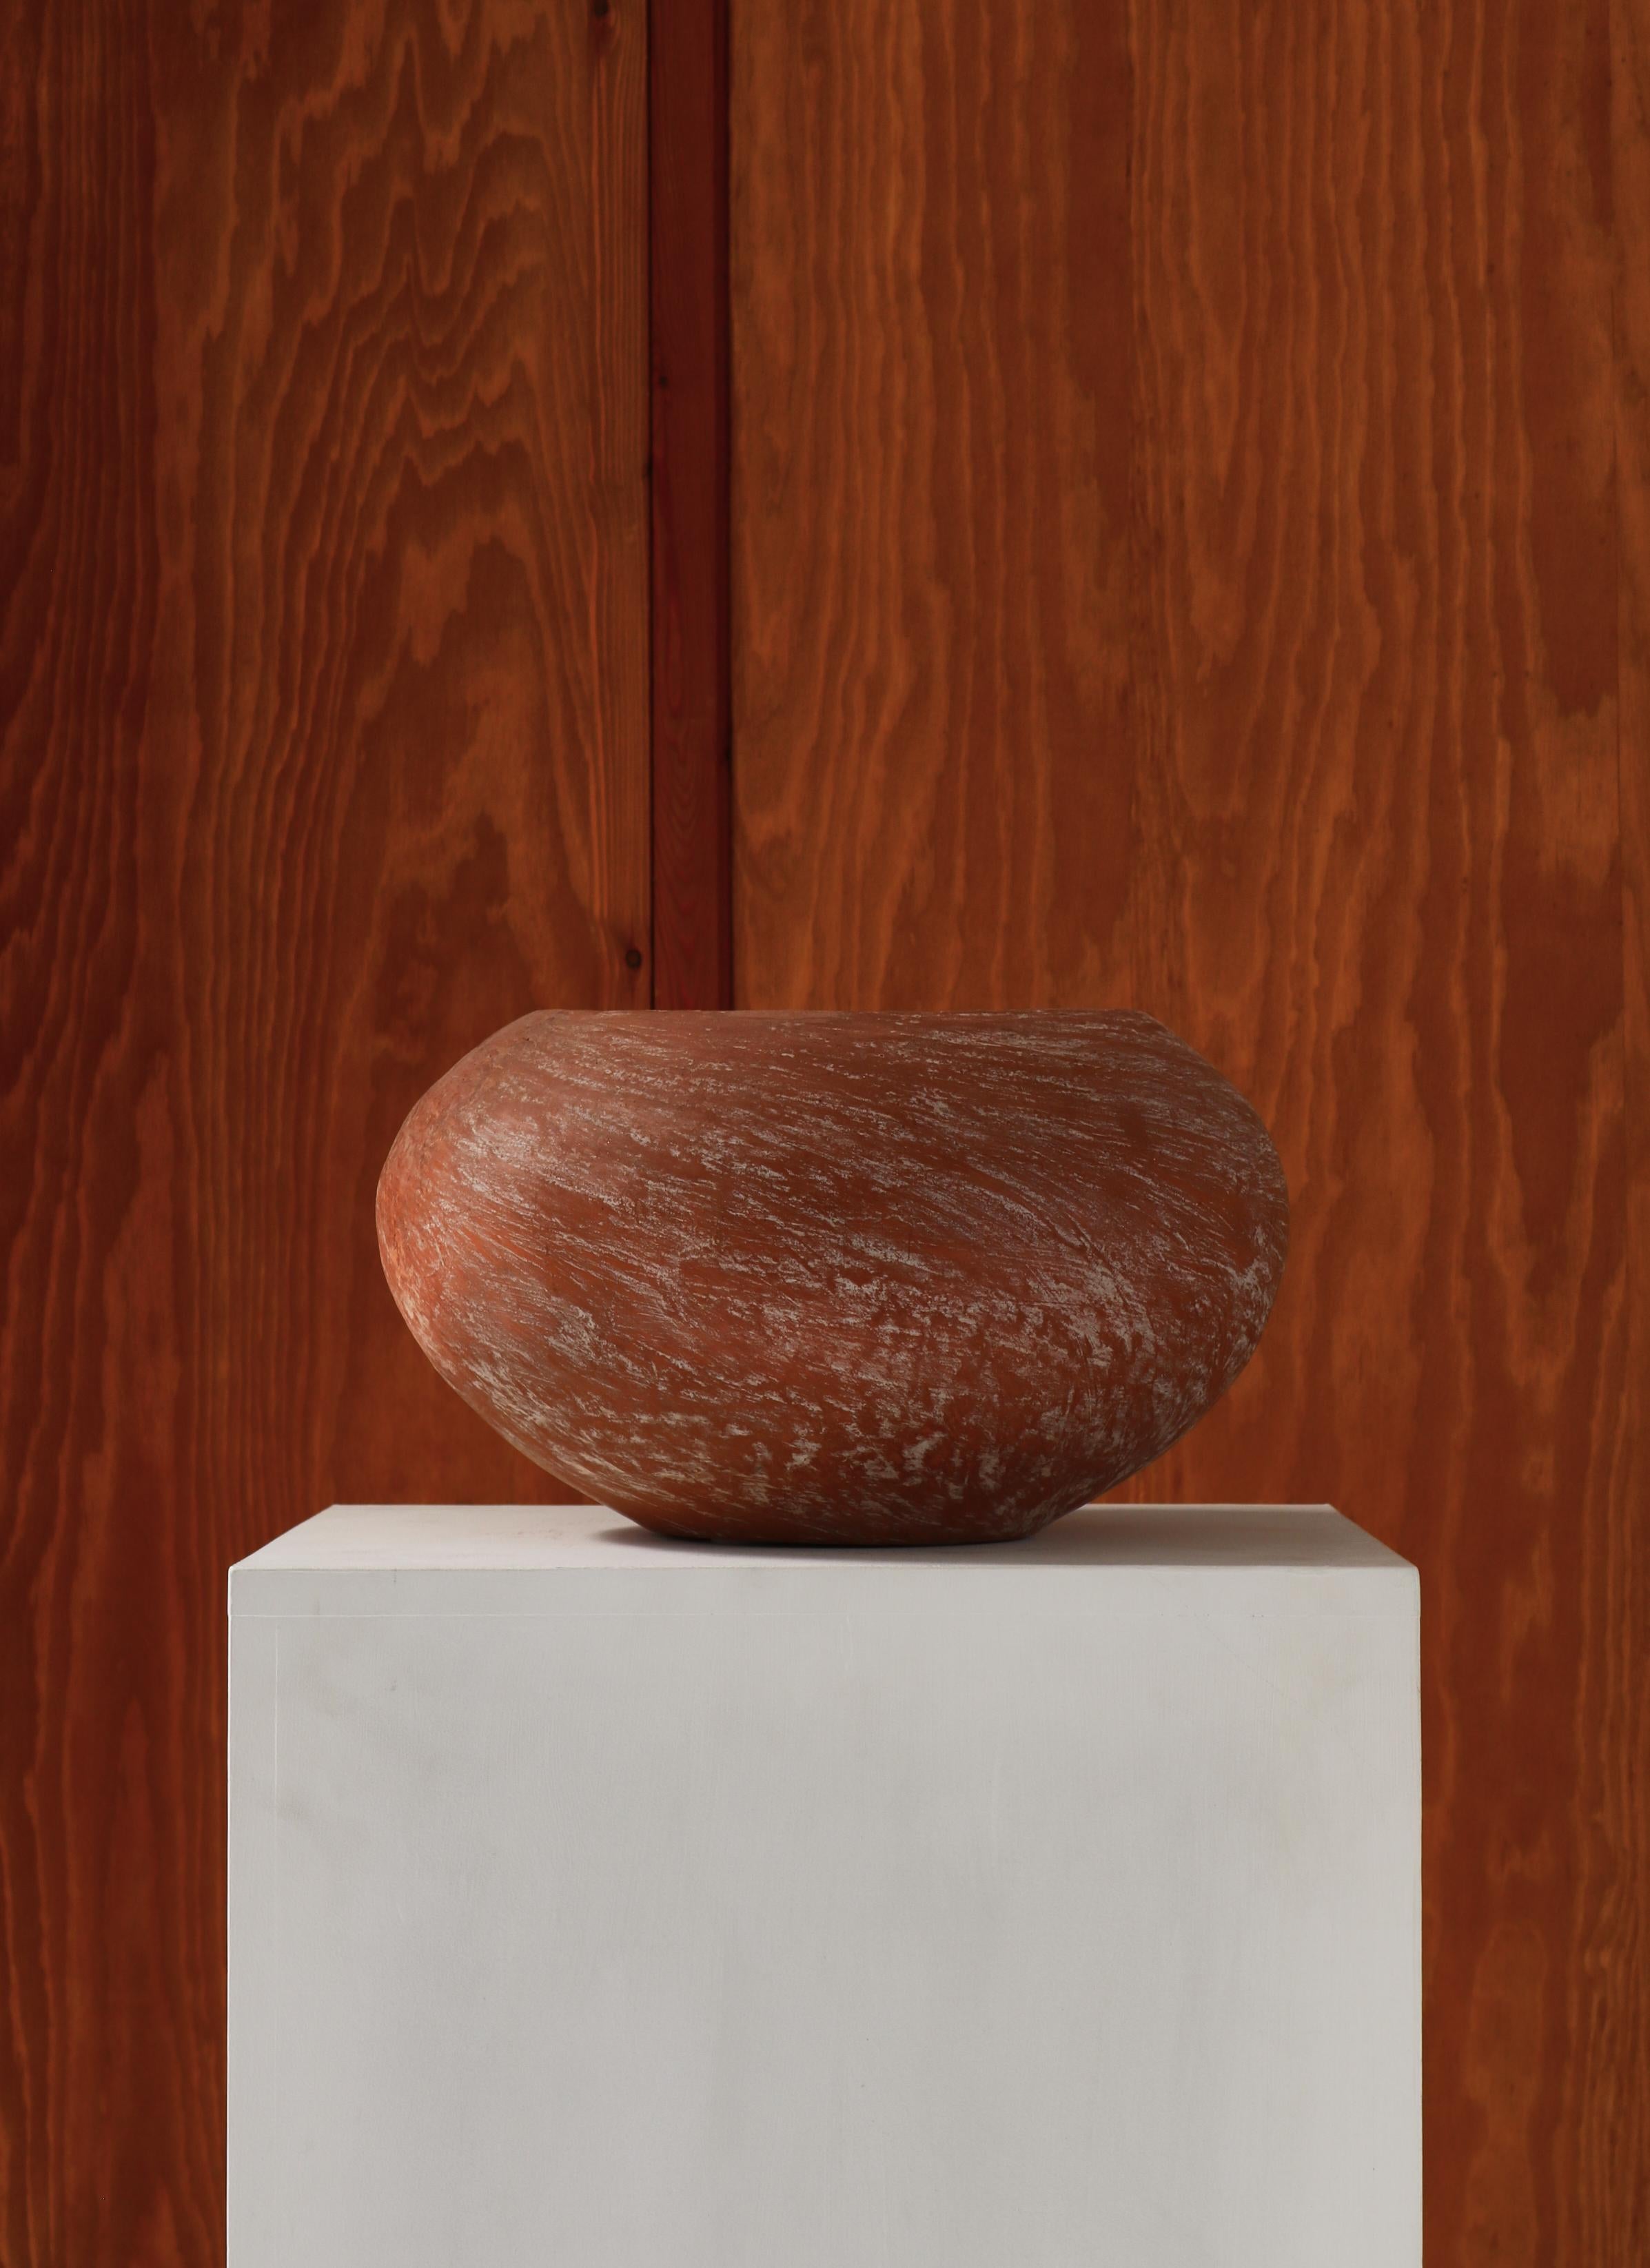 Beautiful and unique terracotta bowl by Danish artist Ole Bjørn Krüger (1922-2007). The bowl is made from lighty glazed chamotte clay that highlights the natural materials in a raw and beautiful way. Handmade by the artist in his own studio in the